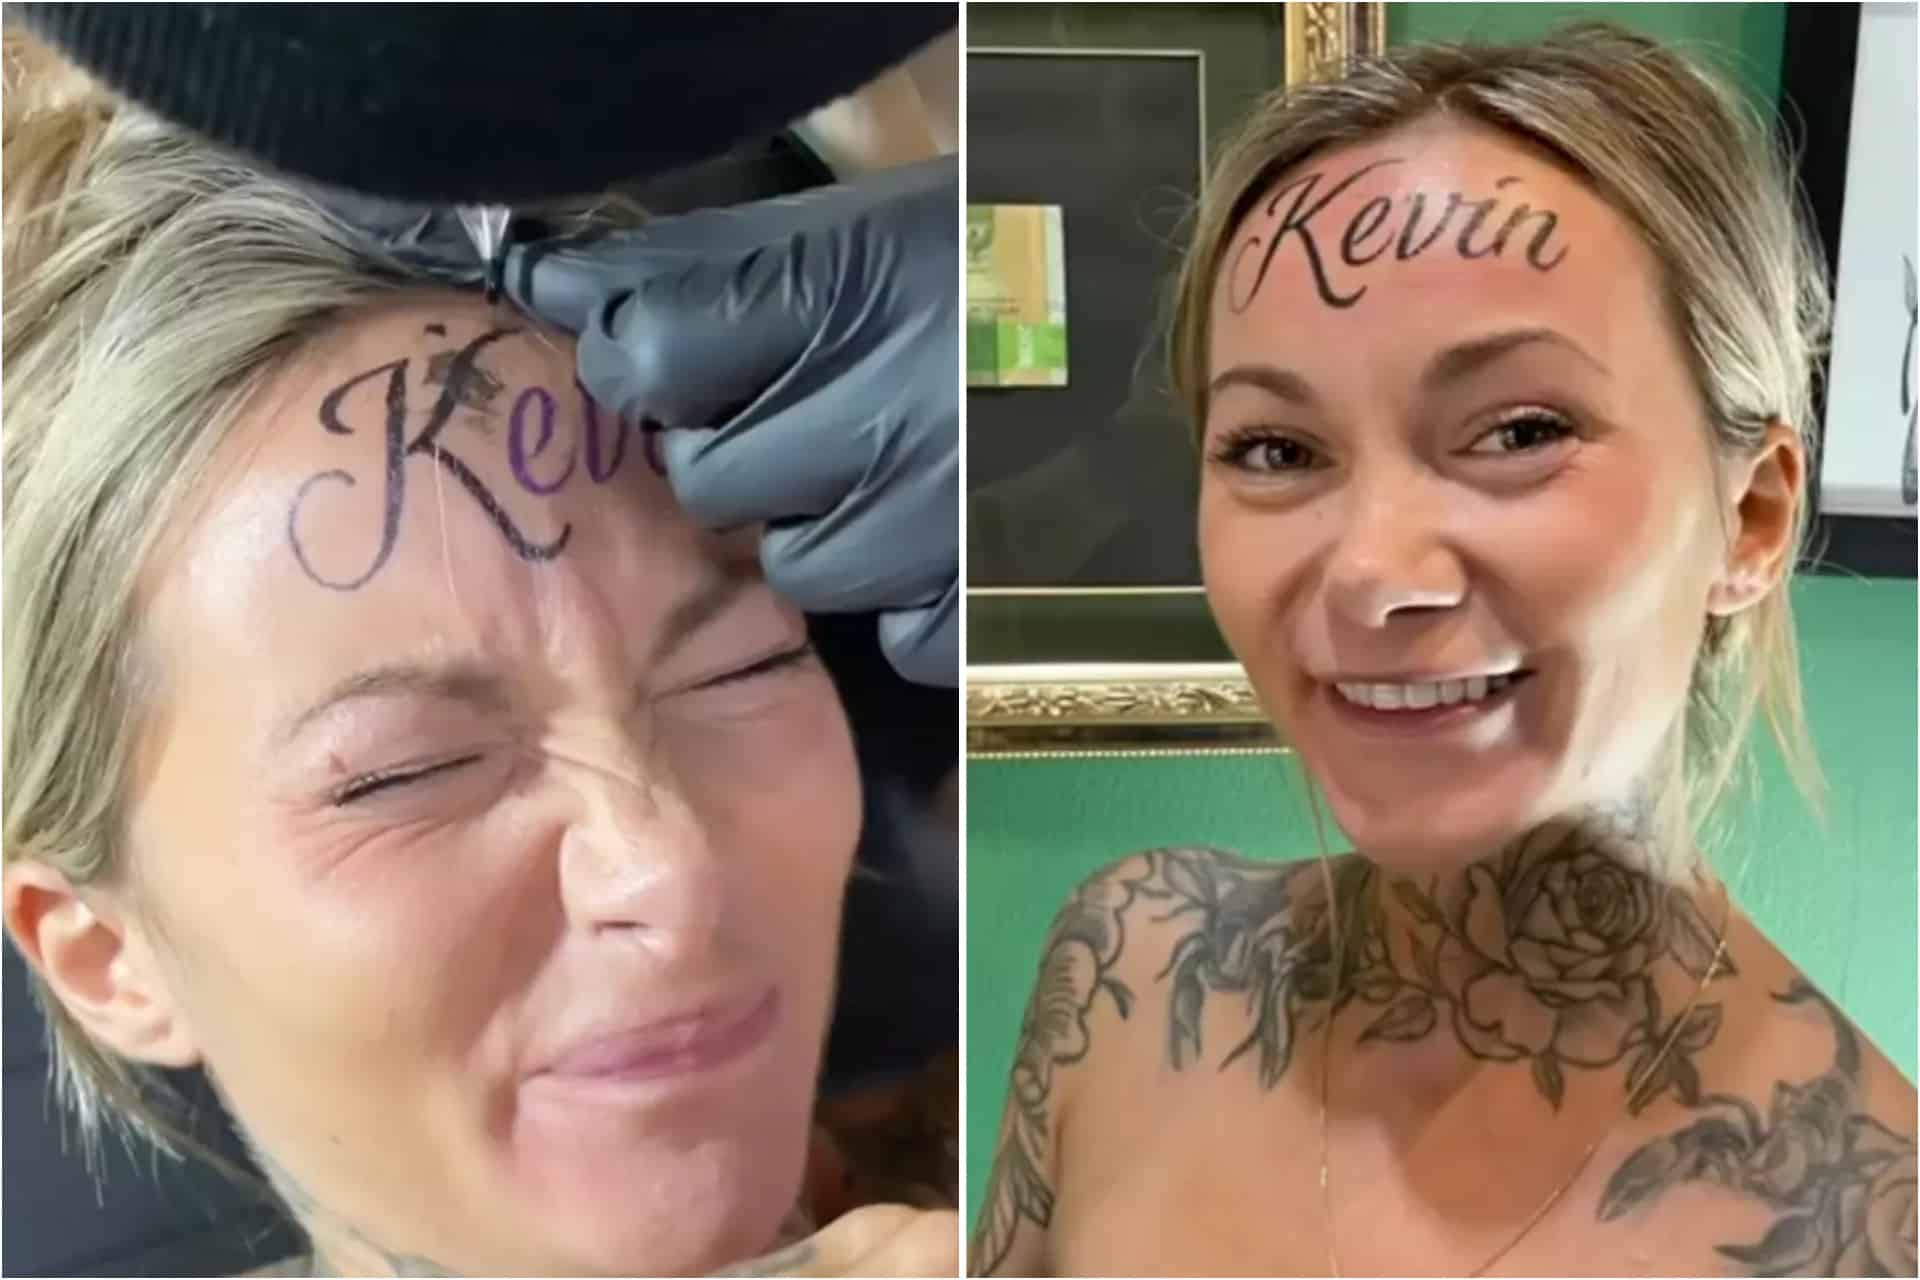 Woman who got her partner’s name tattooed on her head comes clean about new ink